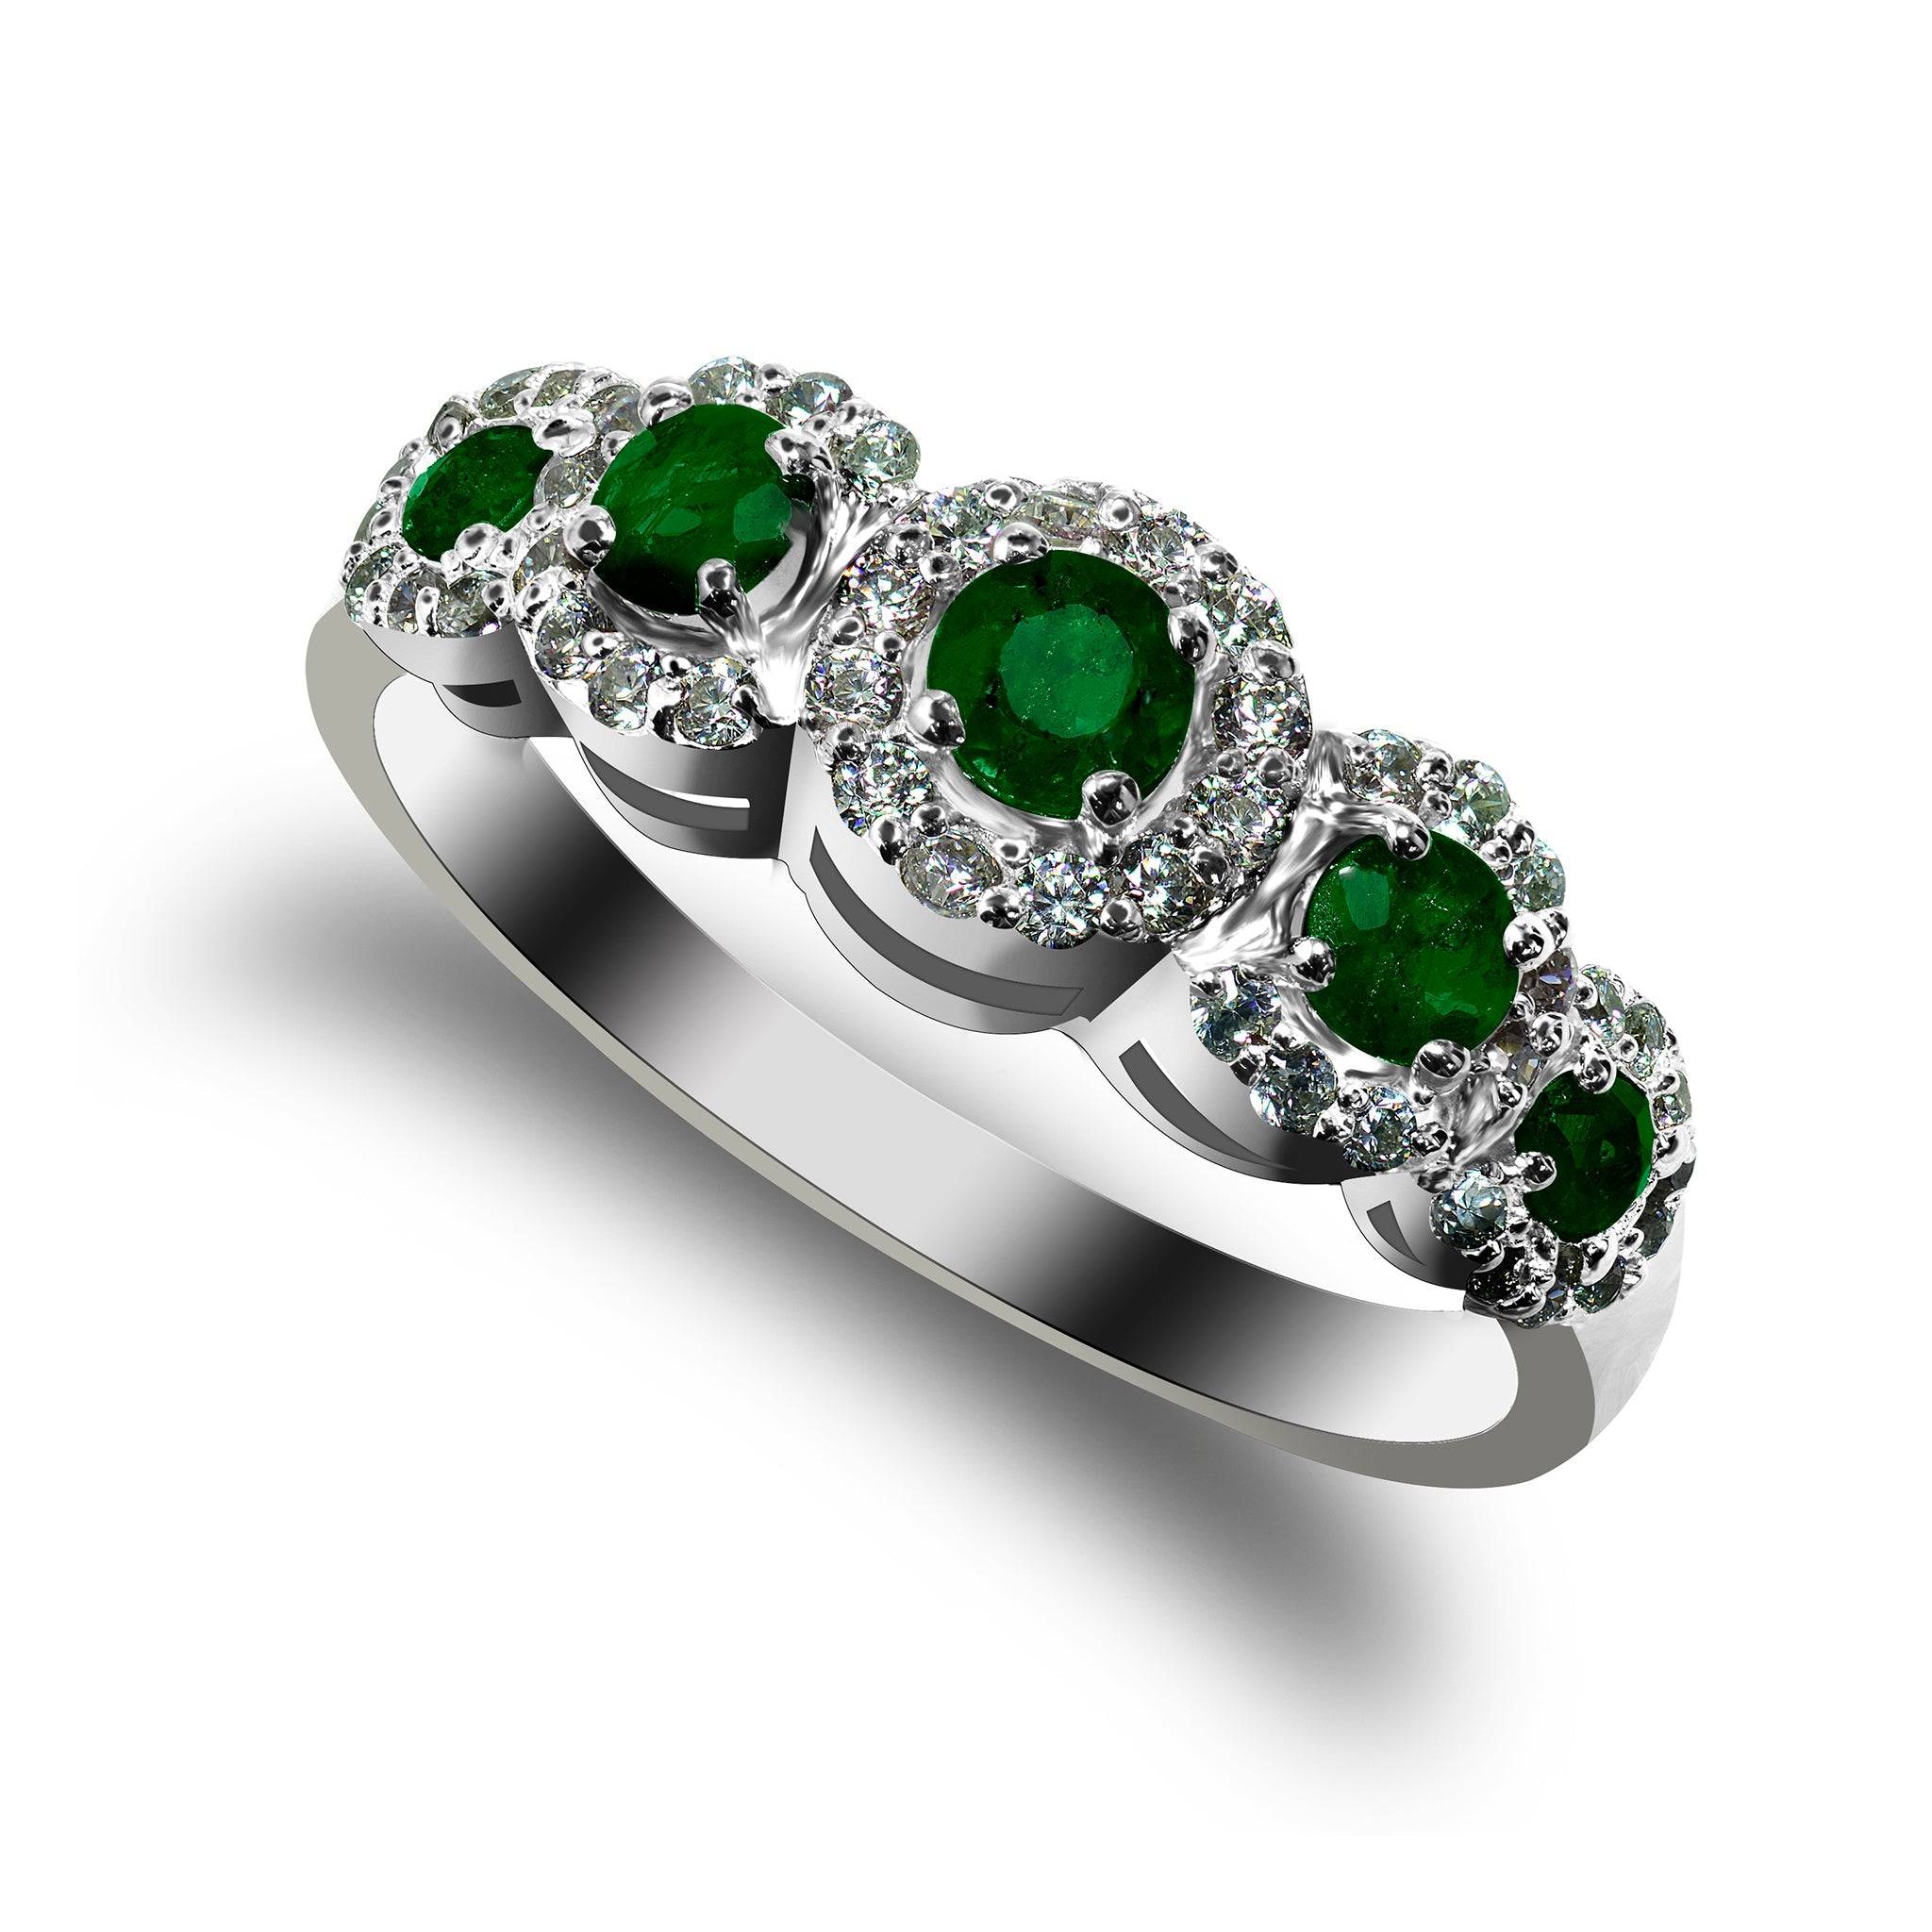 Buy 1.45 Carat (ctw) 18K Yellow Gold Oval Cut Emerald & Round Cut White  Diamond Ladies Bridal Halo Style Engagement Ring 1 1/2 CT Online at  Dazzling Rock